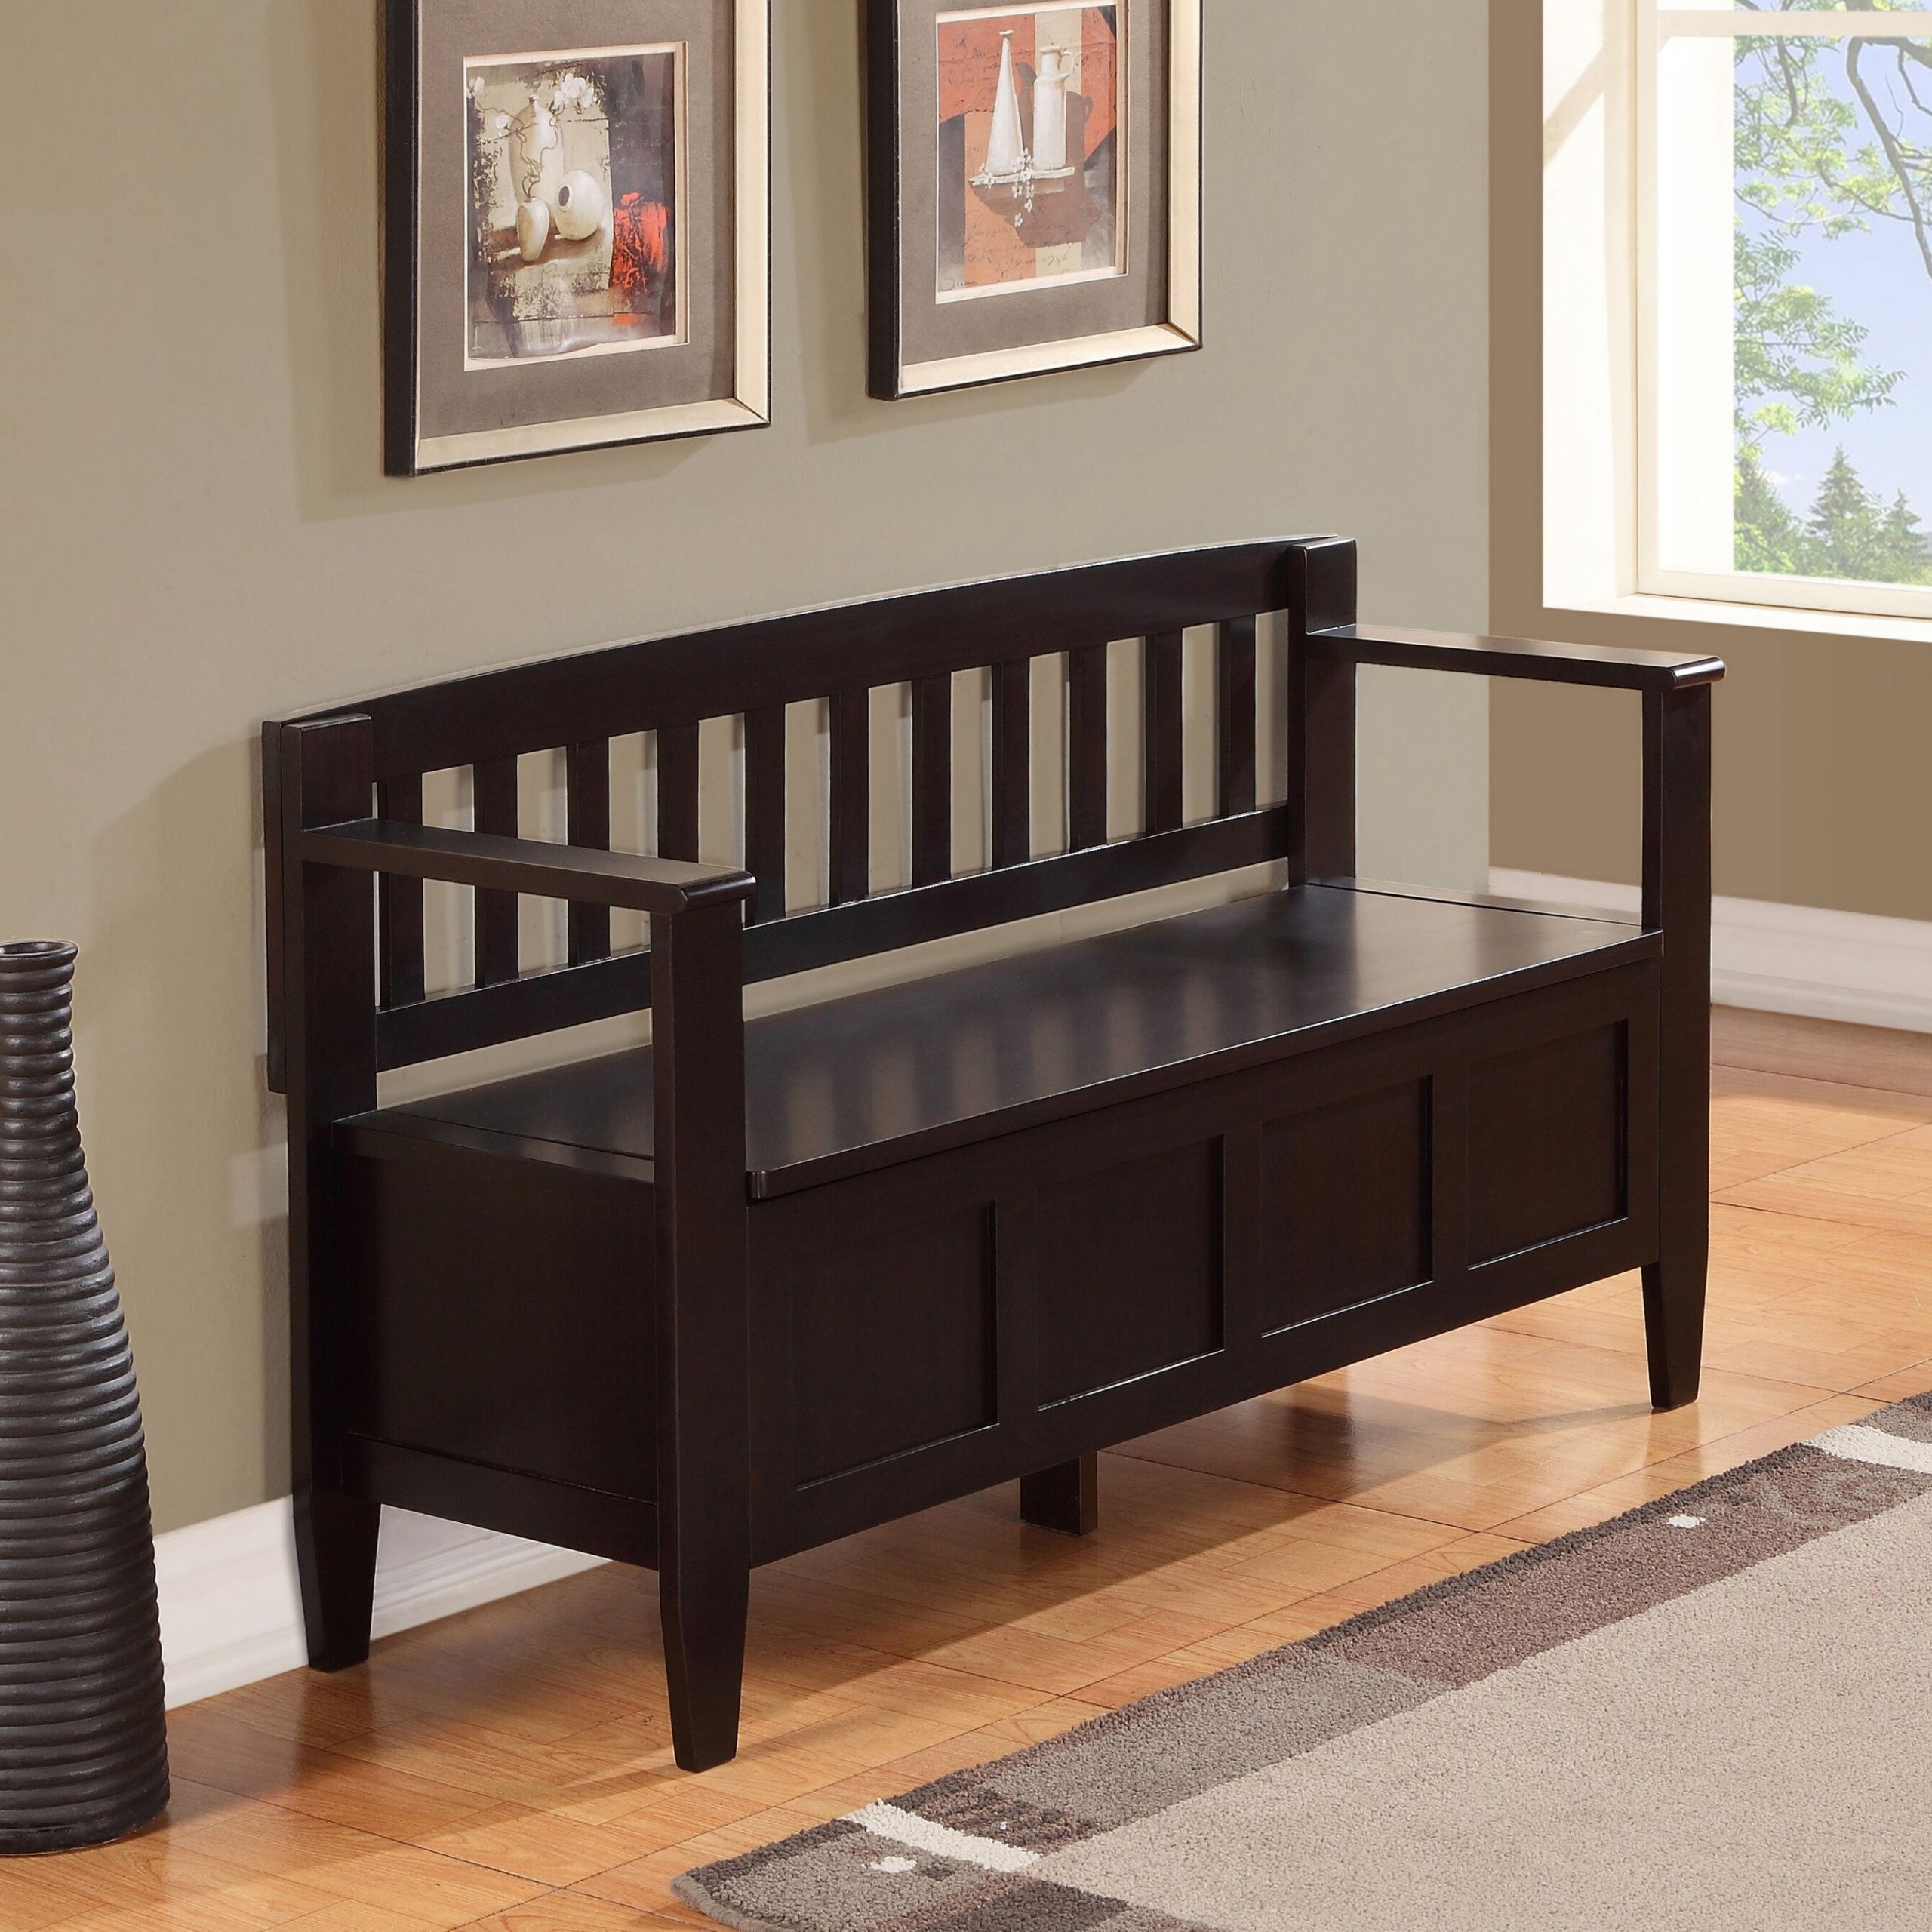 Bench For Entryway With Storage
 Simpli Home Brooklyn Entryway Storage Bench & Reviews